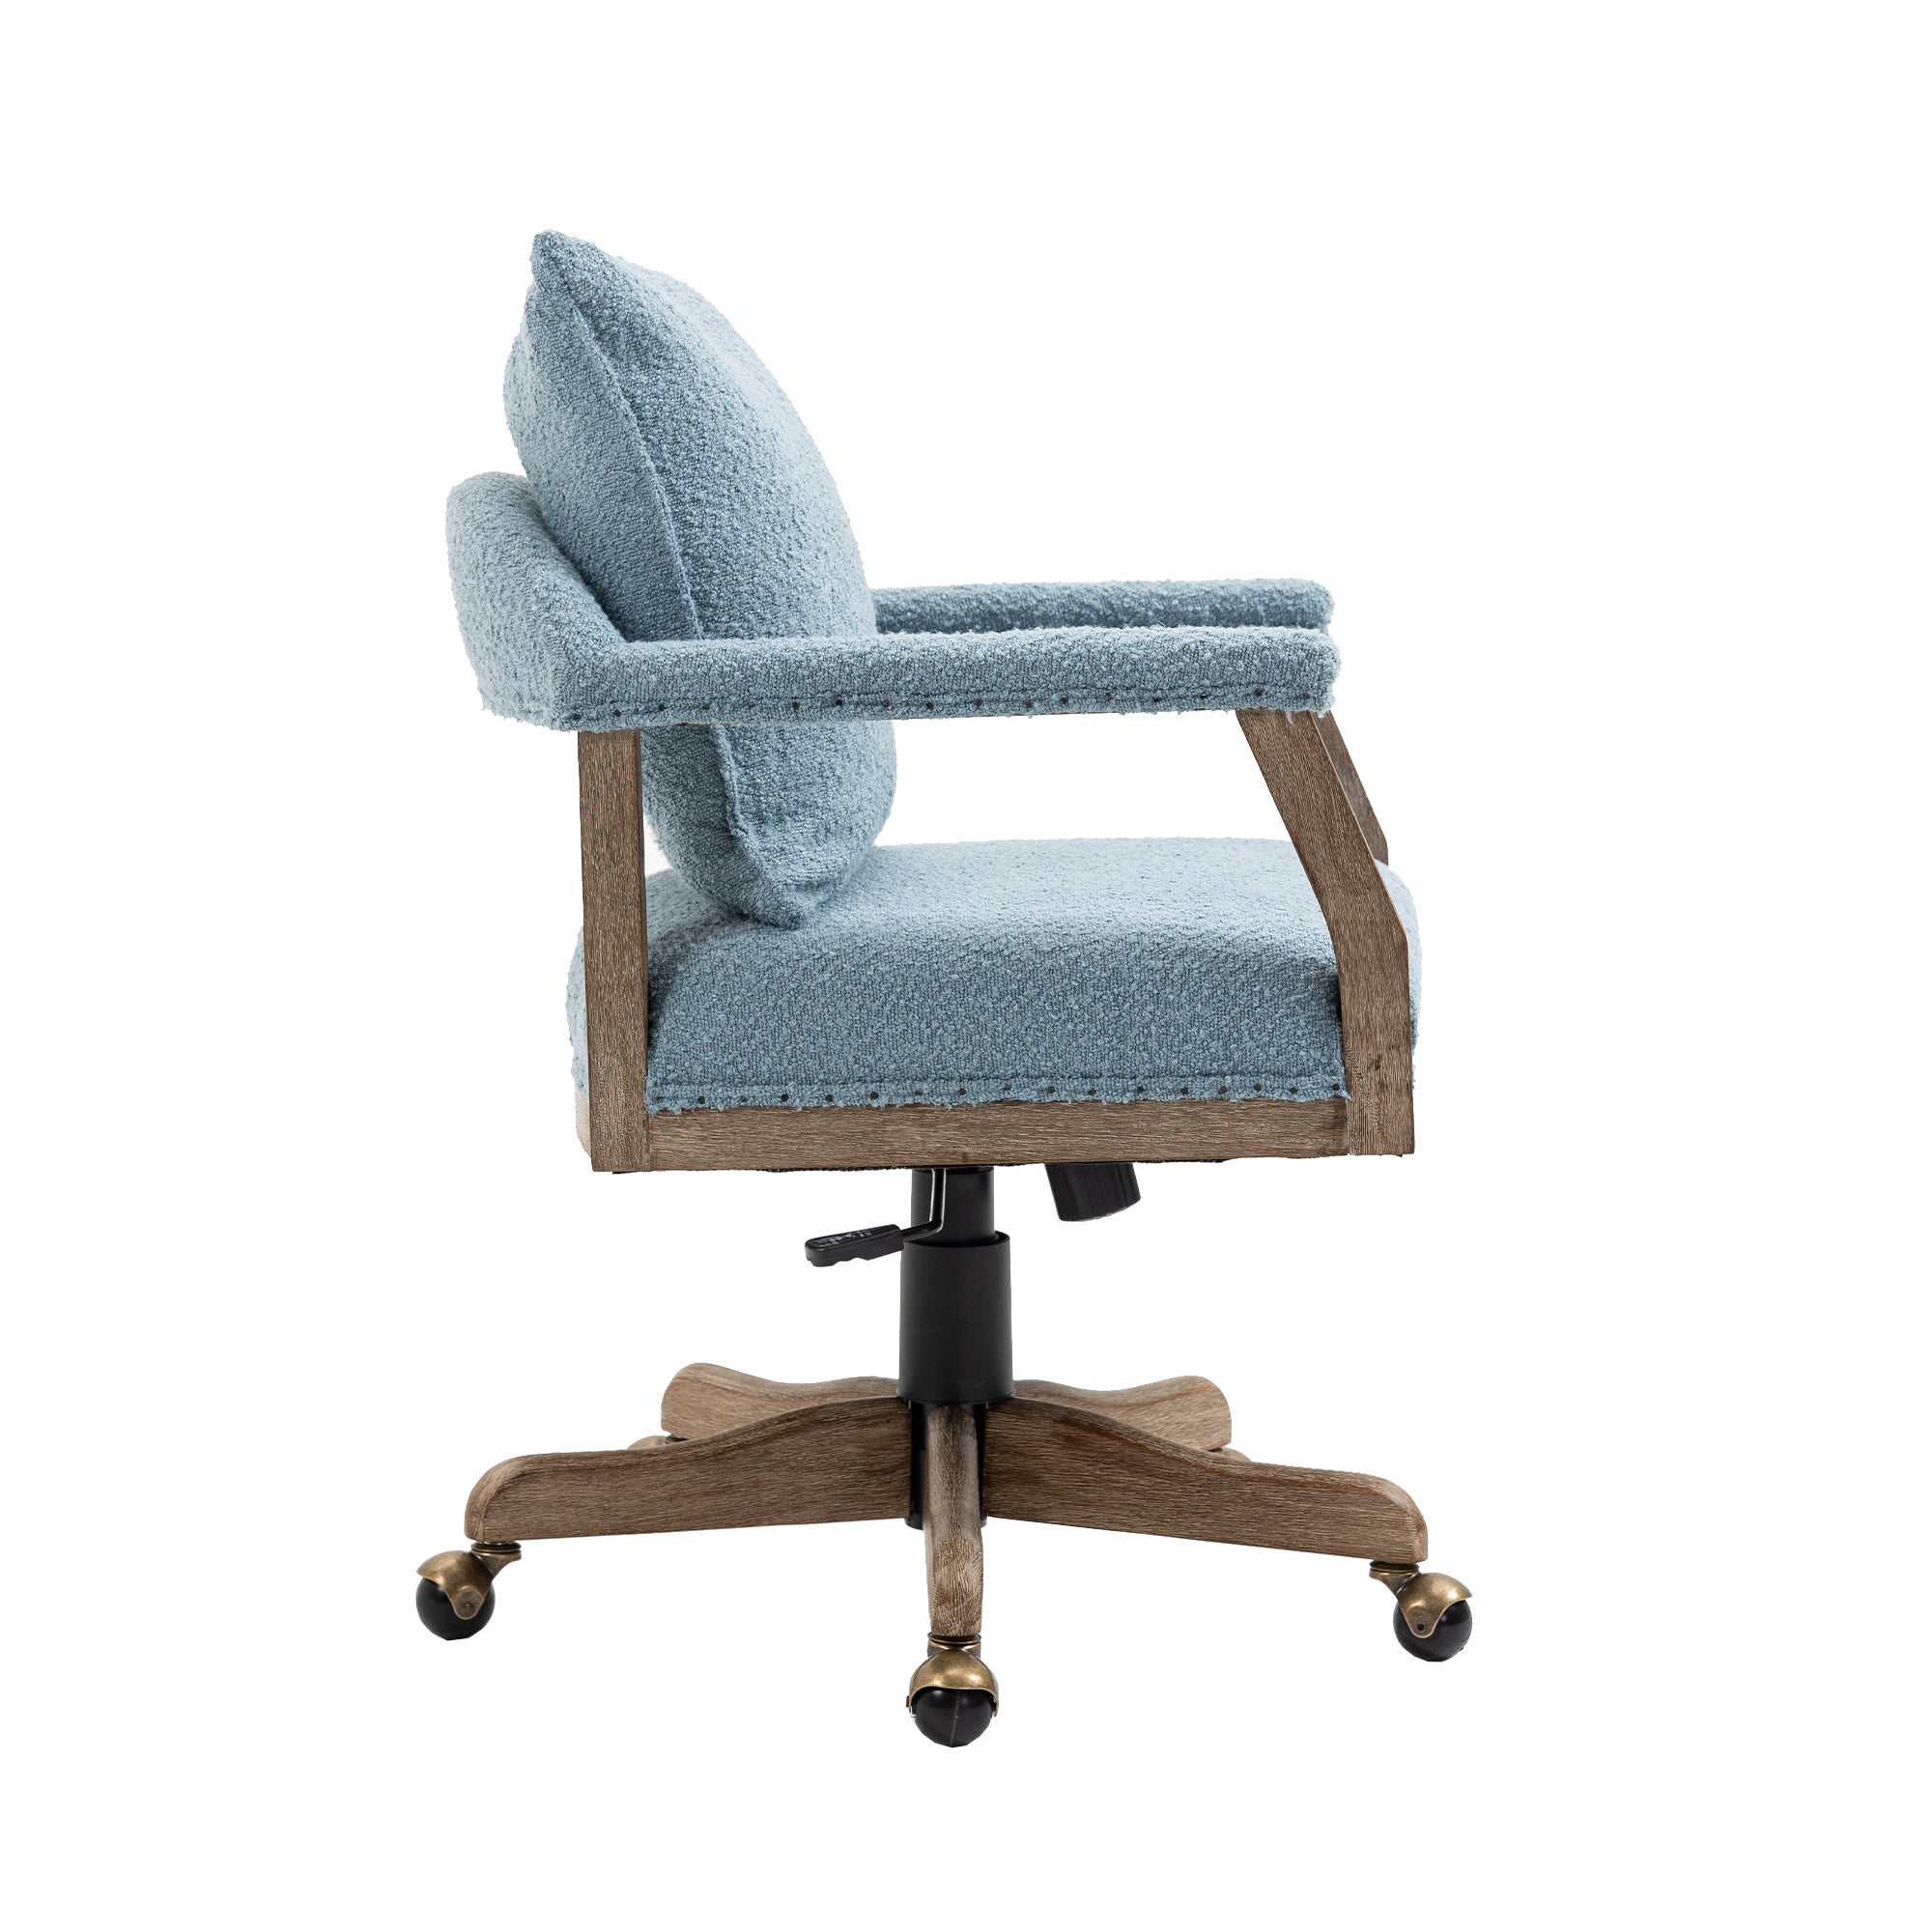 Office Chair Adjustable Swivel Chair Fabric Seat Home Study Chair - Light Blue